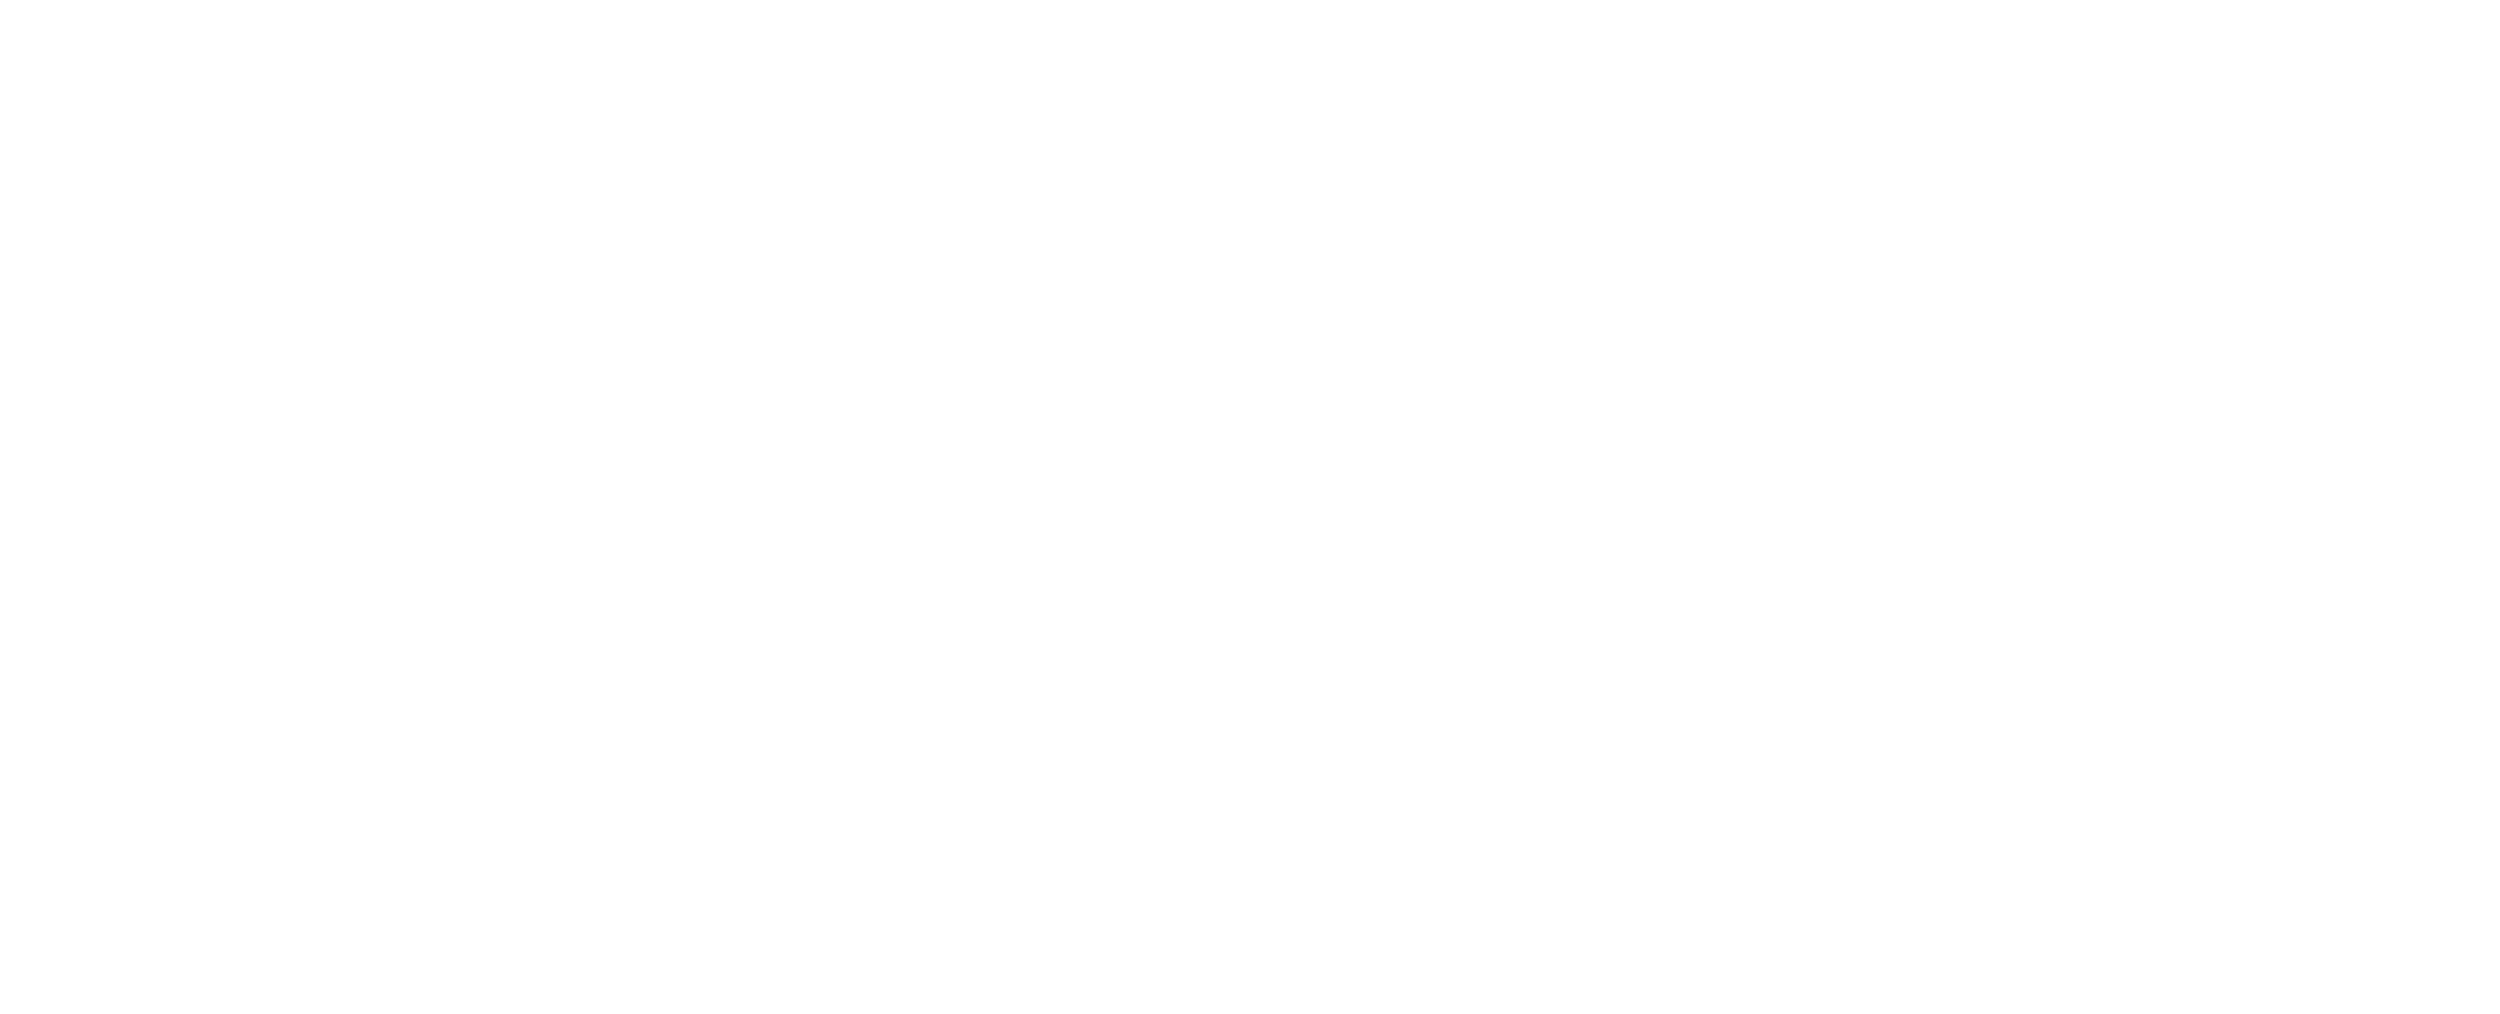 Catalyst Collective